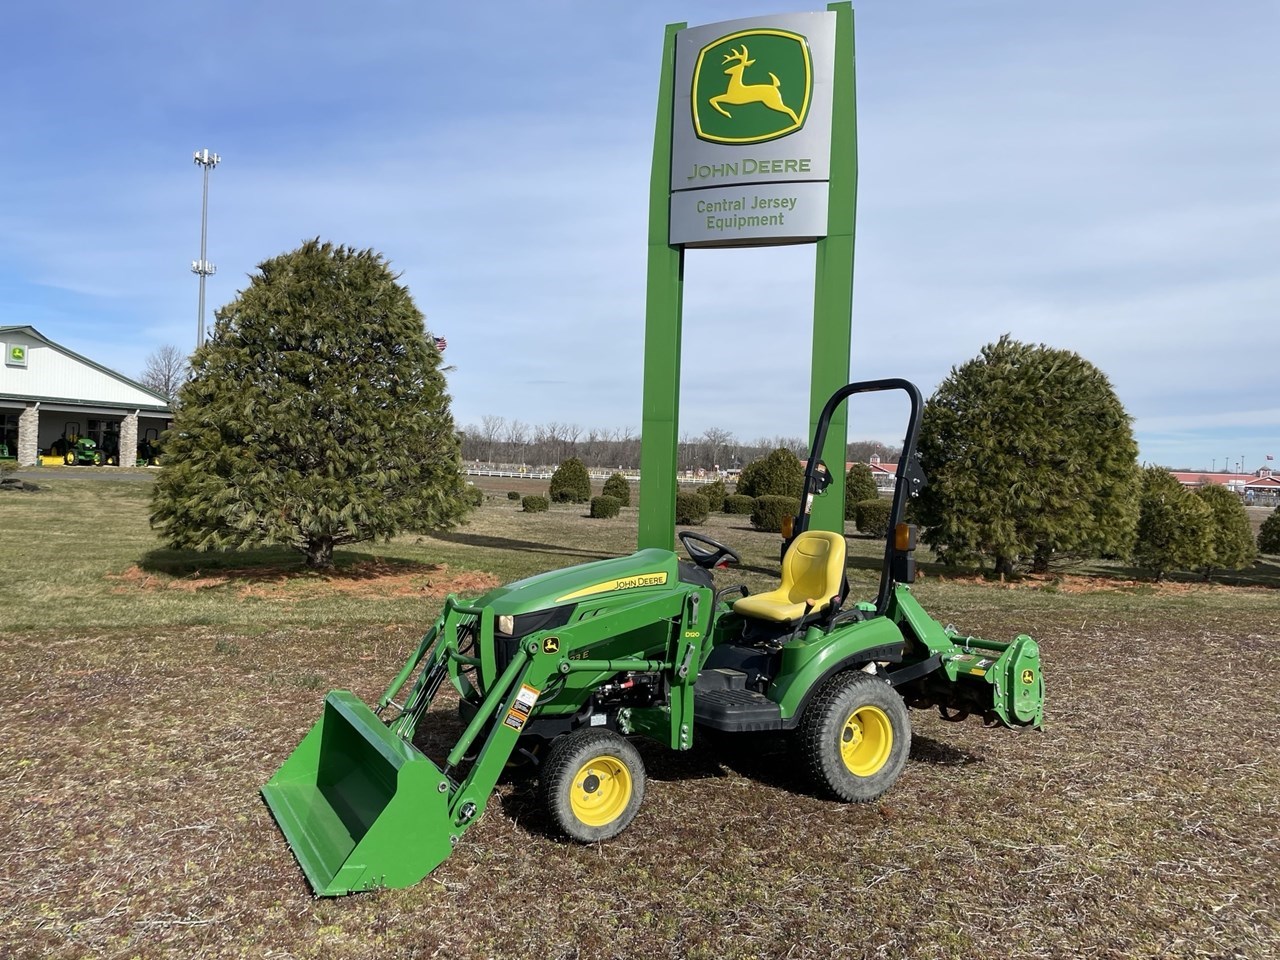 2016 John Deere 1023E Tractor - Compact Utility For Sale